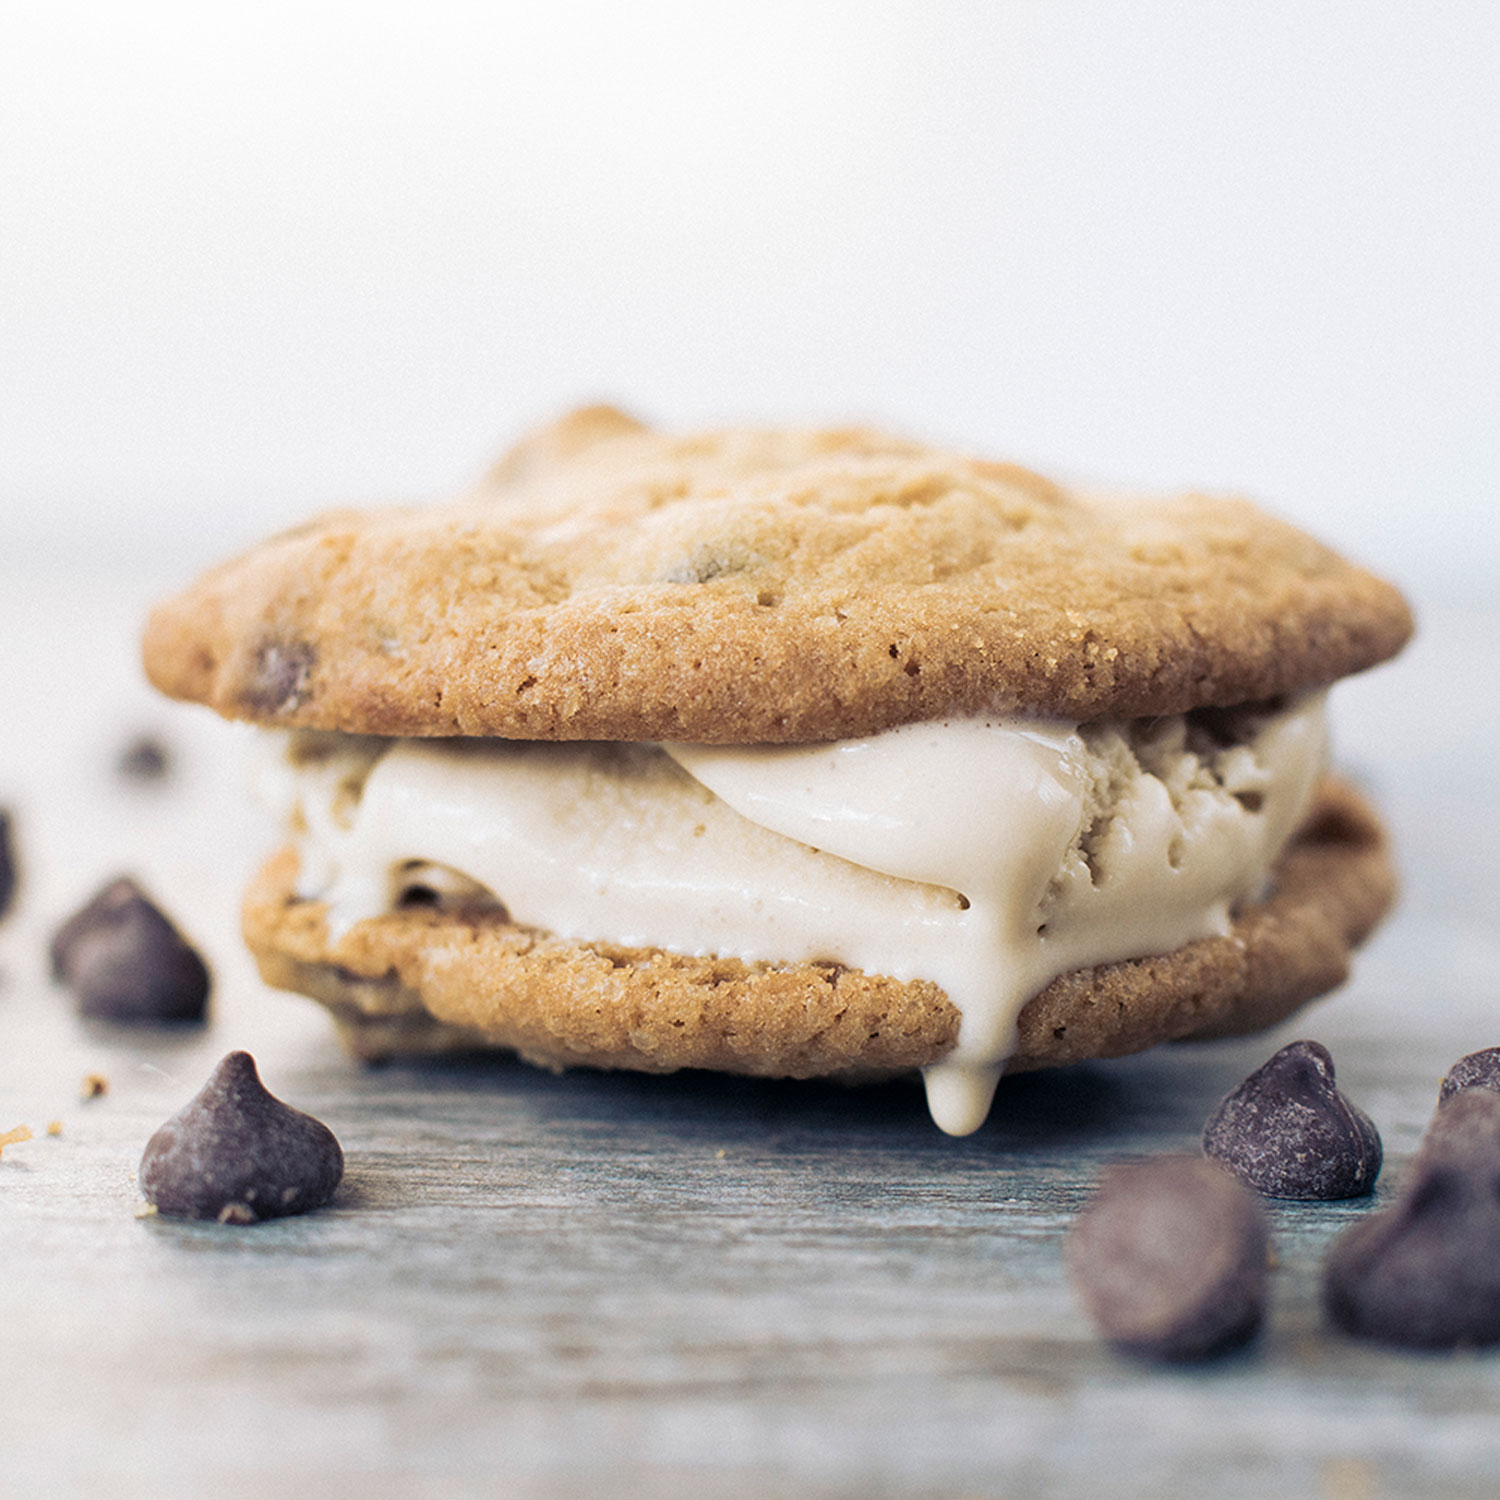 closeup of two chocolate chips cookies sandwiching vanilla ice cream that is slightly melting. Chocolate chips are scattered around